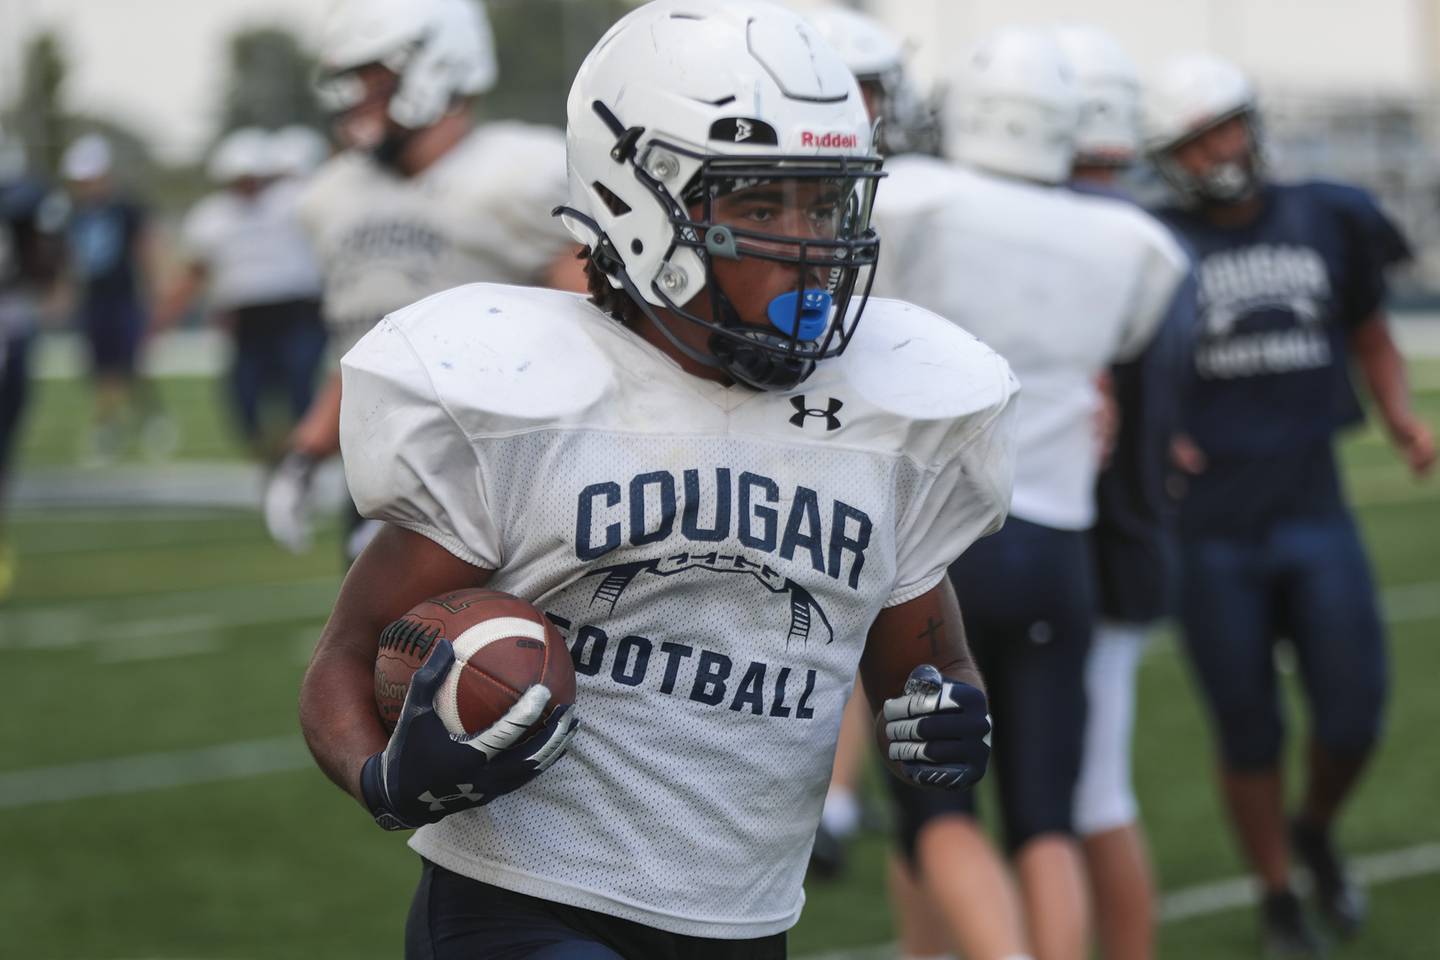 Plainfield South running back Brian Stanton carries the ball during practice on Wednesday, Aug. 18, 2021, at Plainfield South High School in Plainfield, Ill.